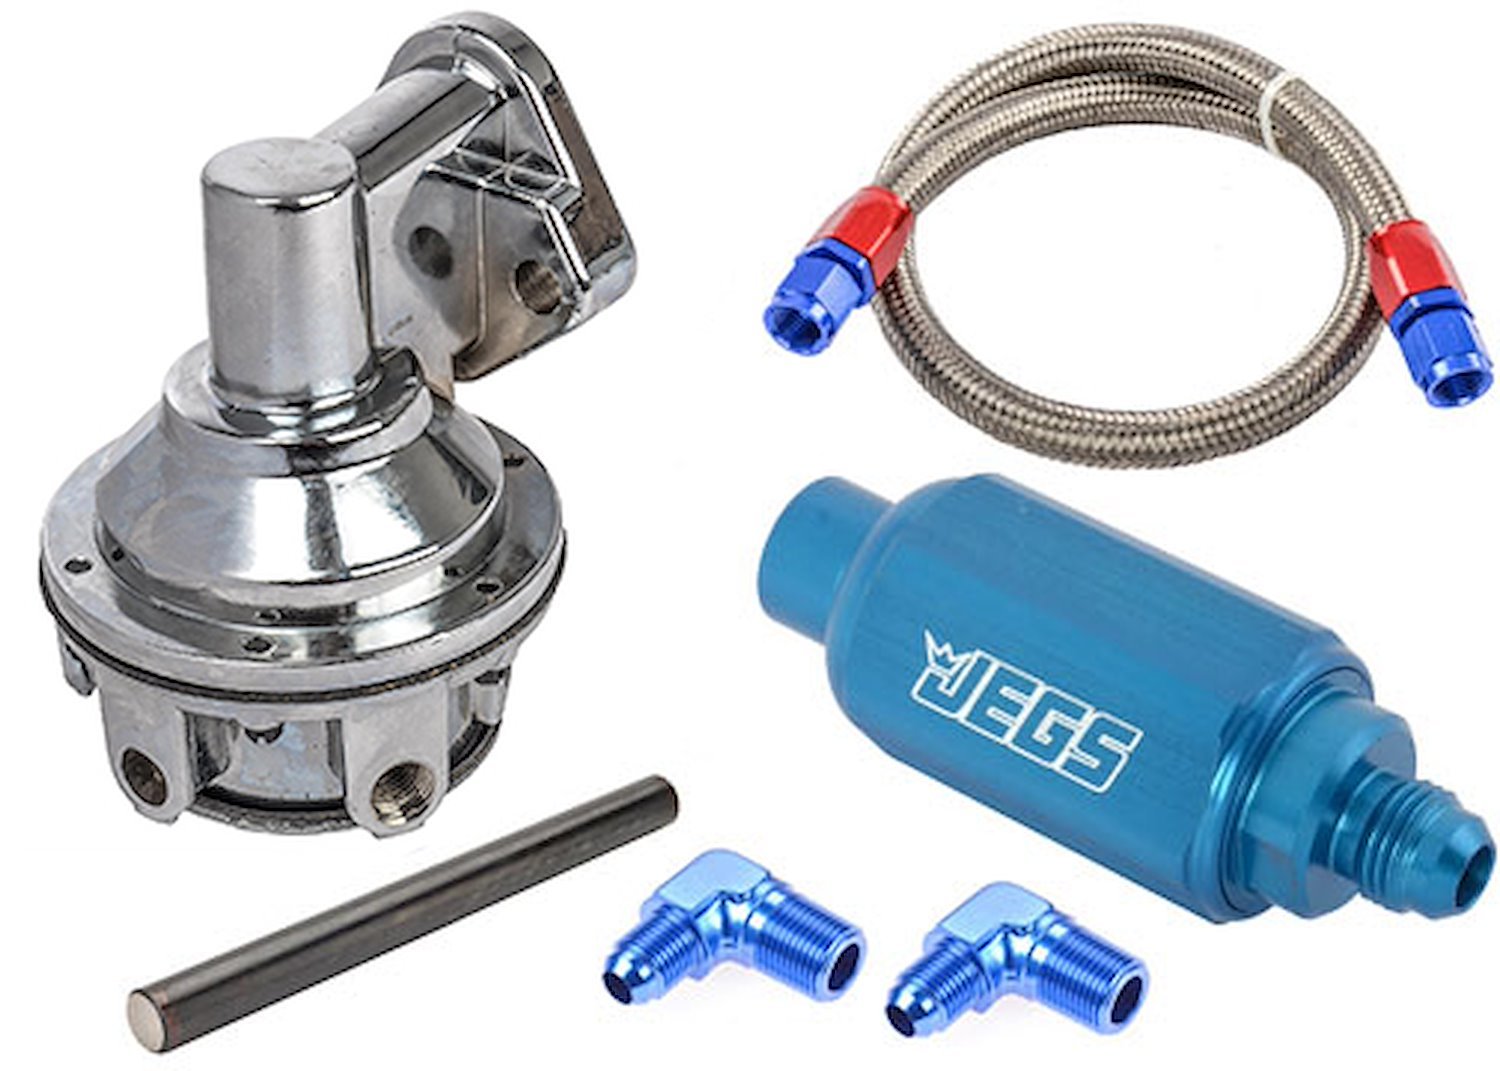 JEGS Mechanical Fuel Pump & Installation Kit for Small Block Chevy  265-283-327-350-400 [110 gph, Blue Fittings]